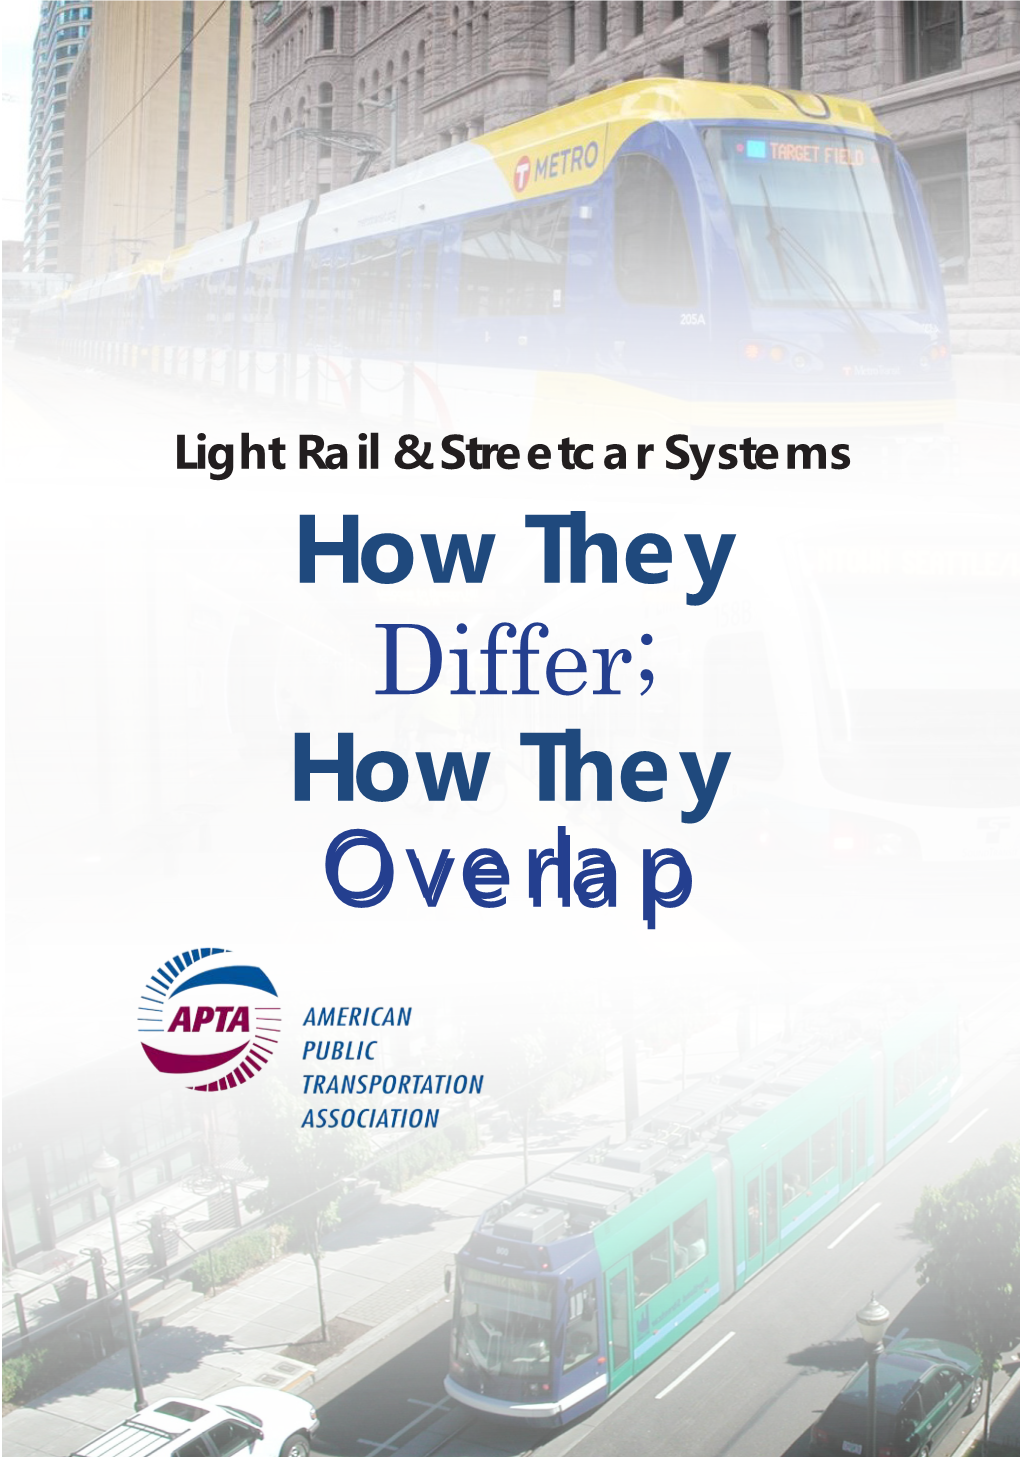 Light Rail and Streetcar Systems, Highlighting What Sets Them Apart and Where the Differences Become Fuzzy